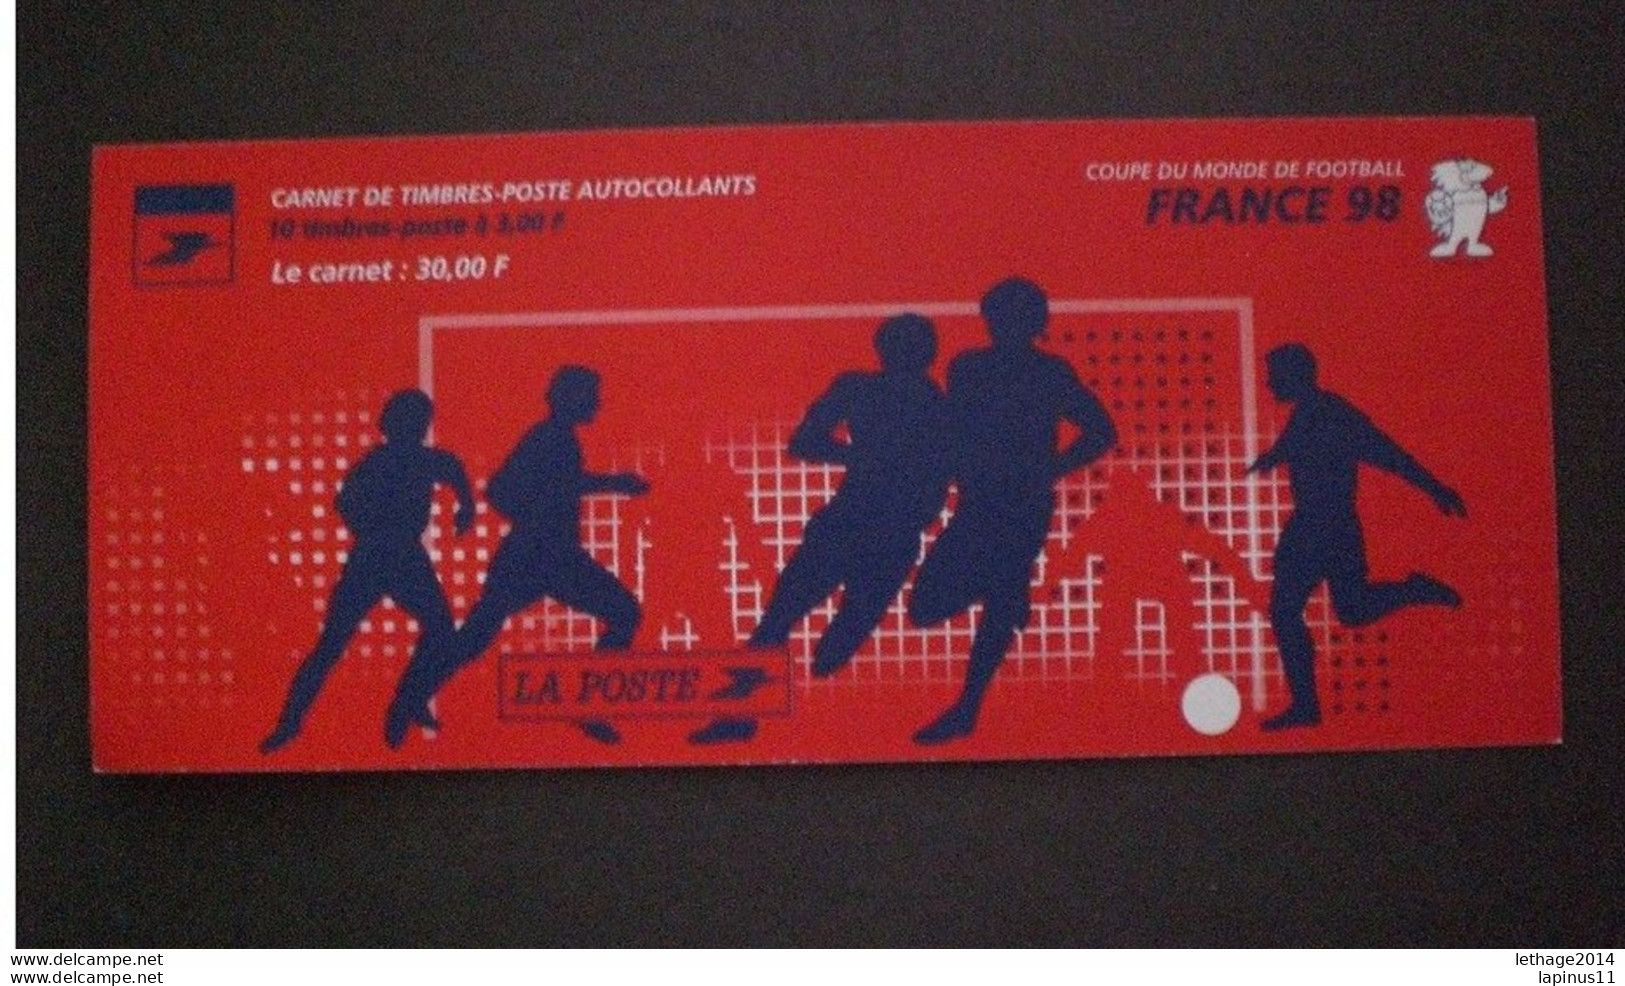 FRANCE 1998 Football World Cup - France - Self-adhesive Stamp CARNETS - Booklets